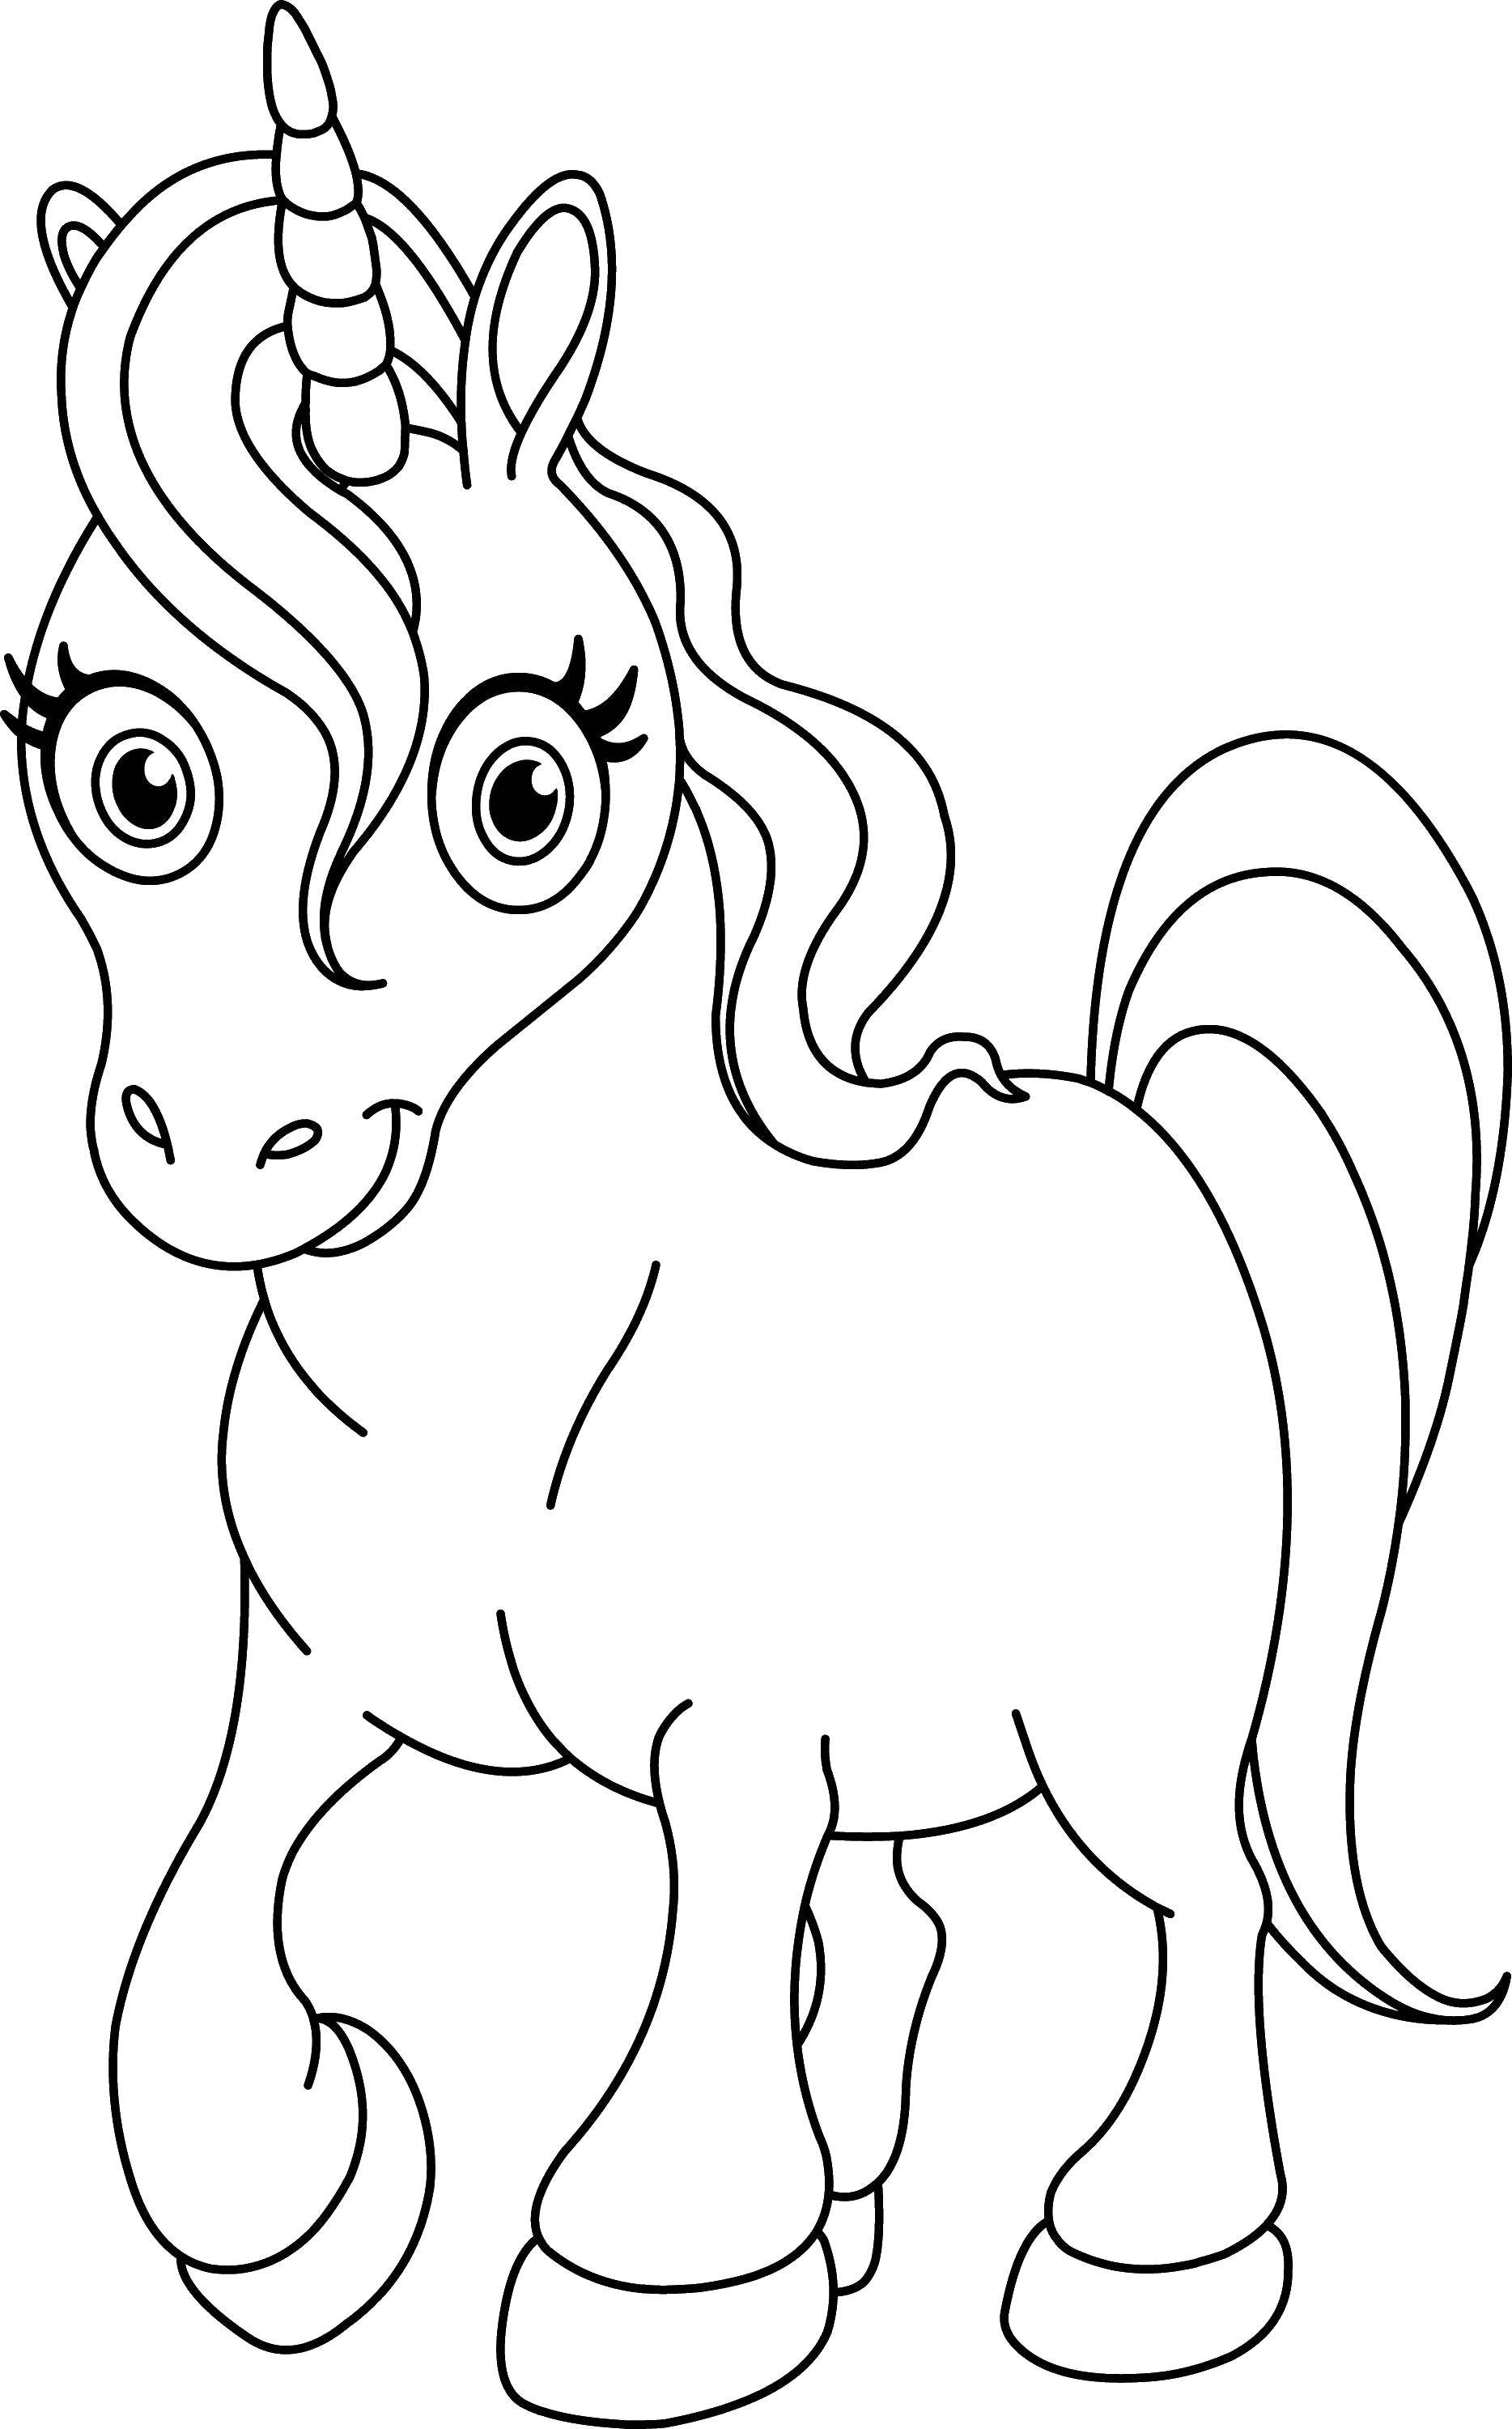 Coloring Cute pony. Category Ponies. Tags:  pony tale, girls.